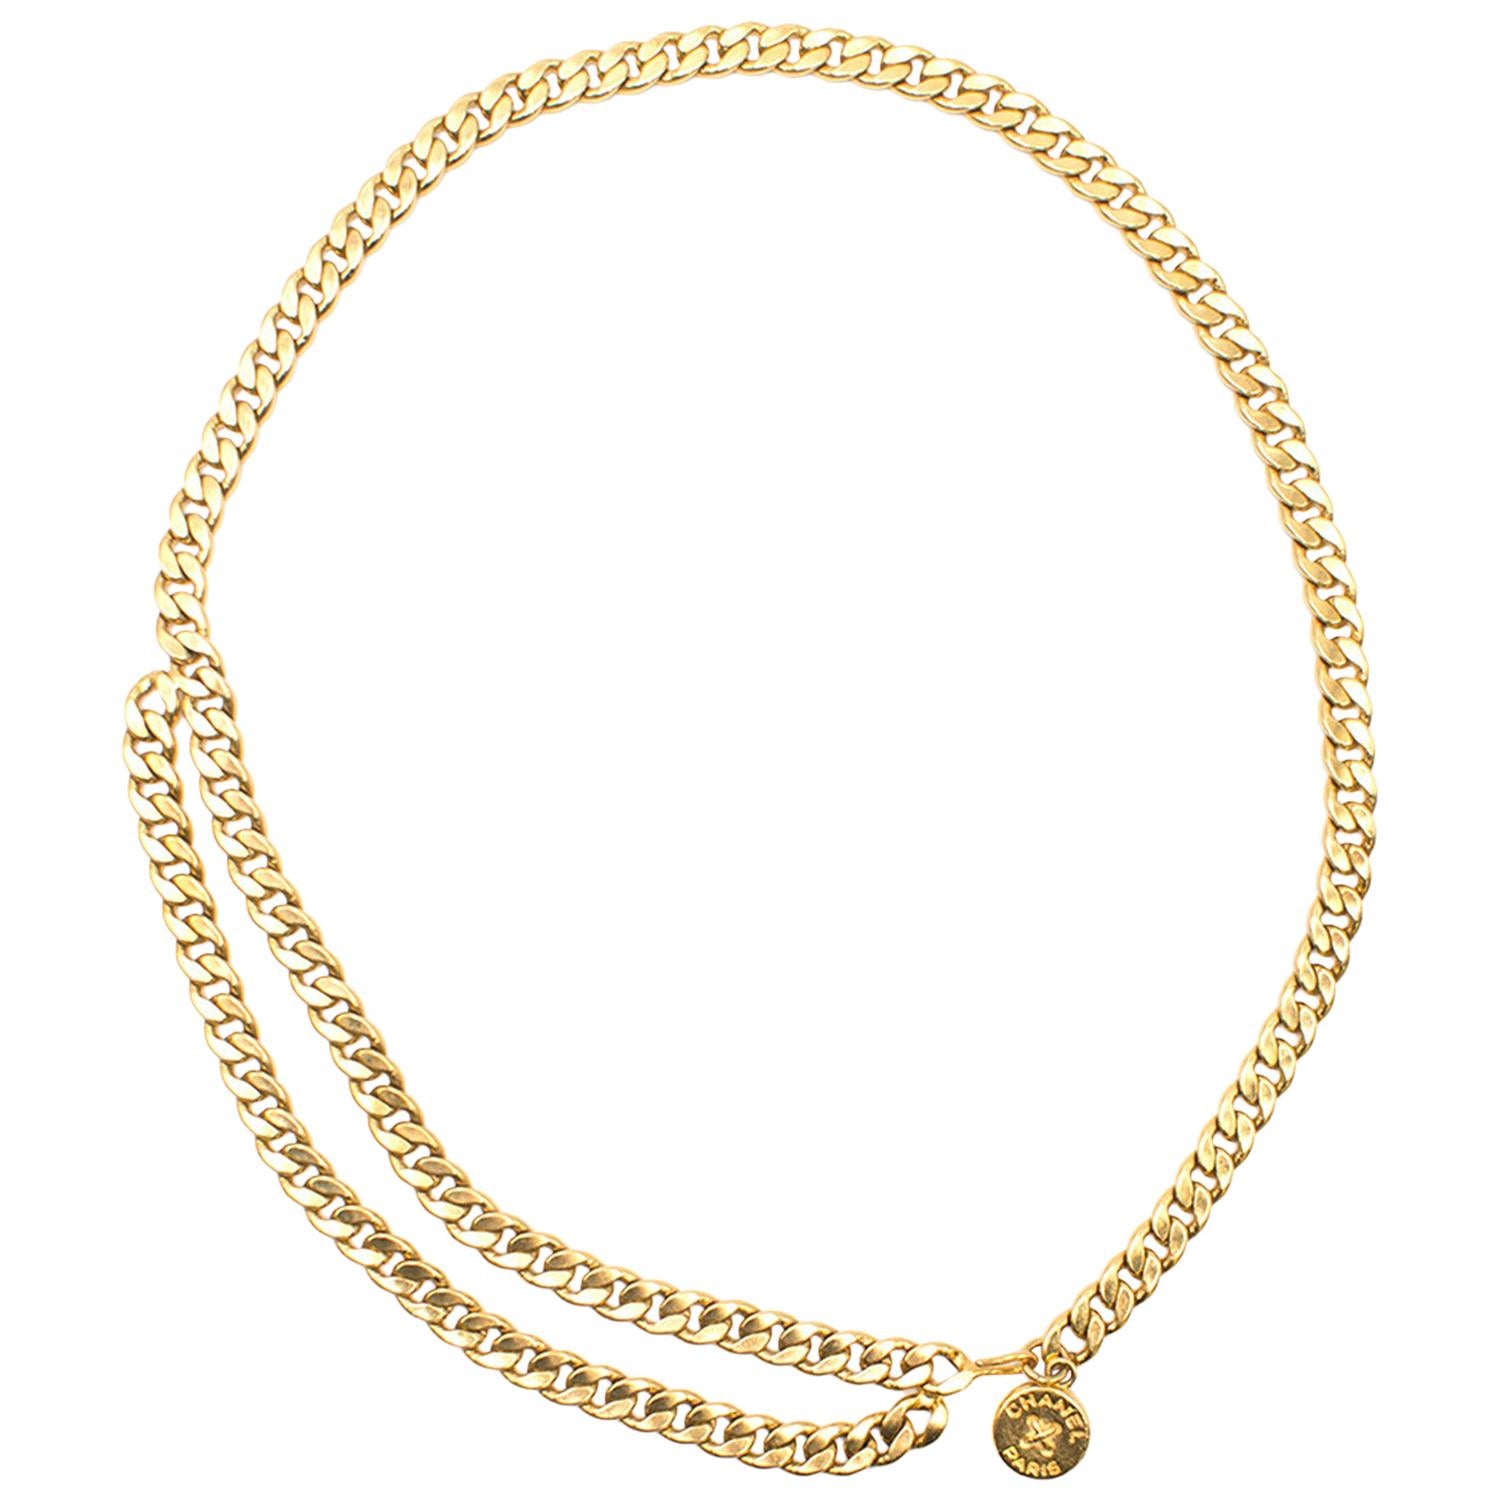 Chanel Vintage 1994 Gold-plated Chain Belt/Necklace